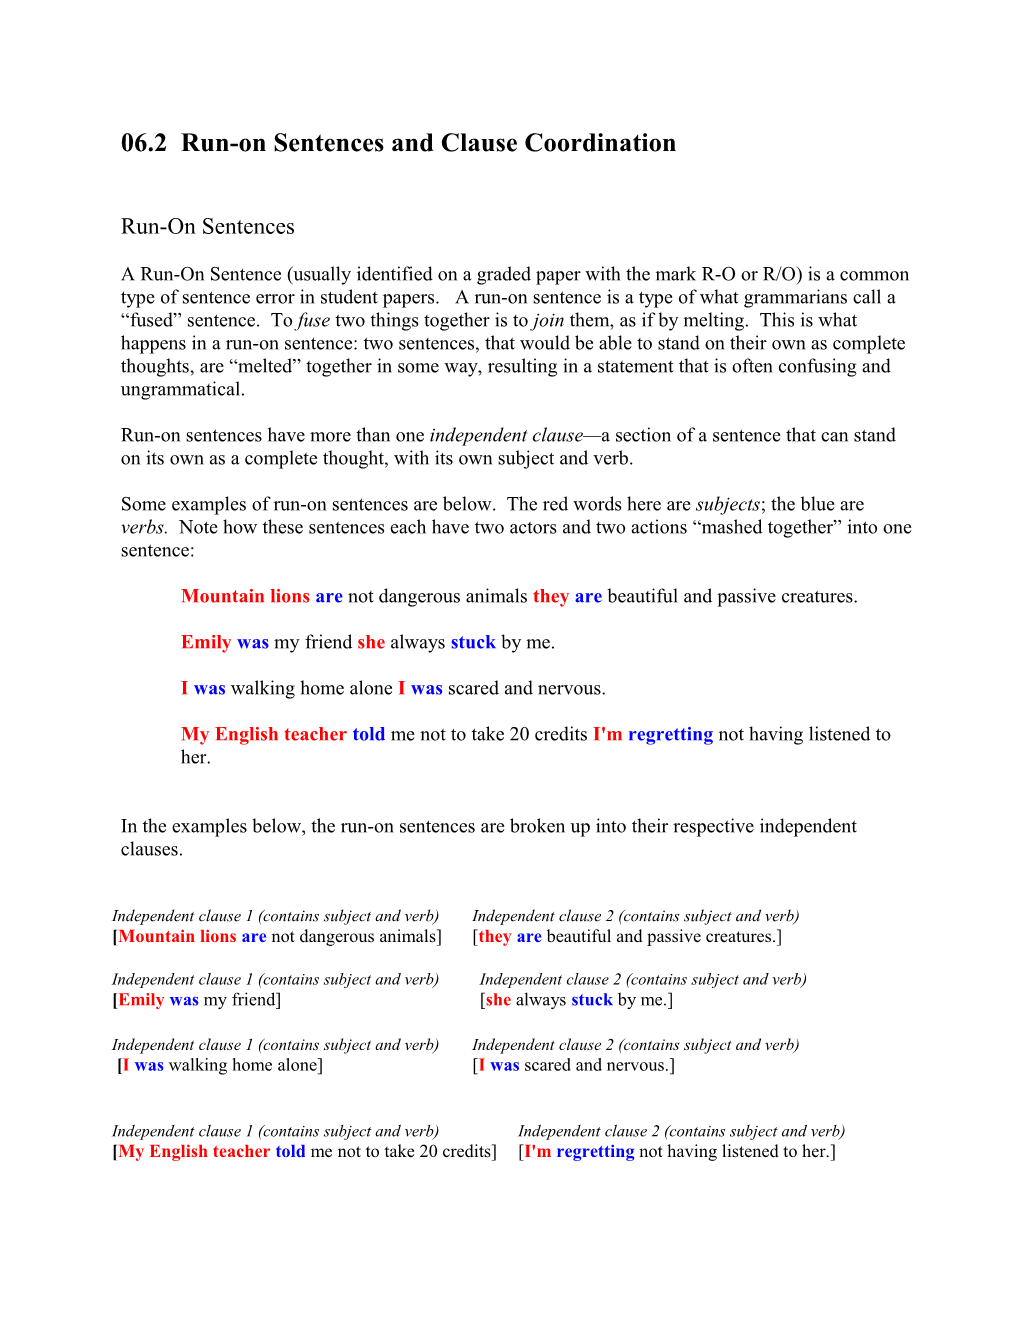 06.2 Run-On Sentences and Clause Coordination